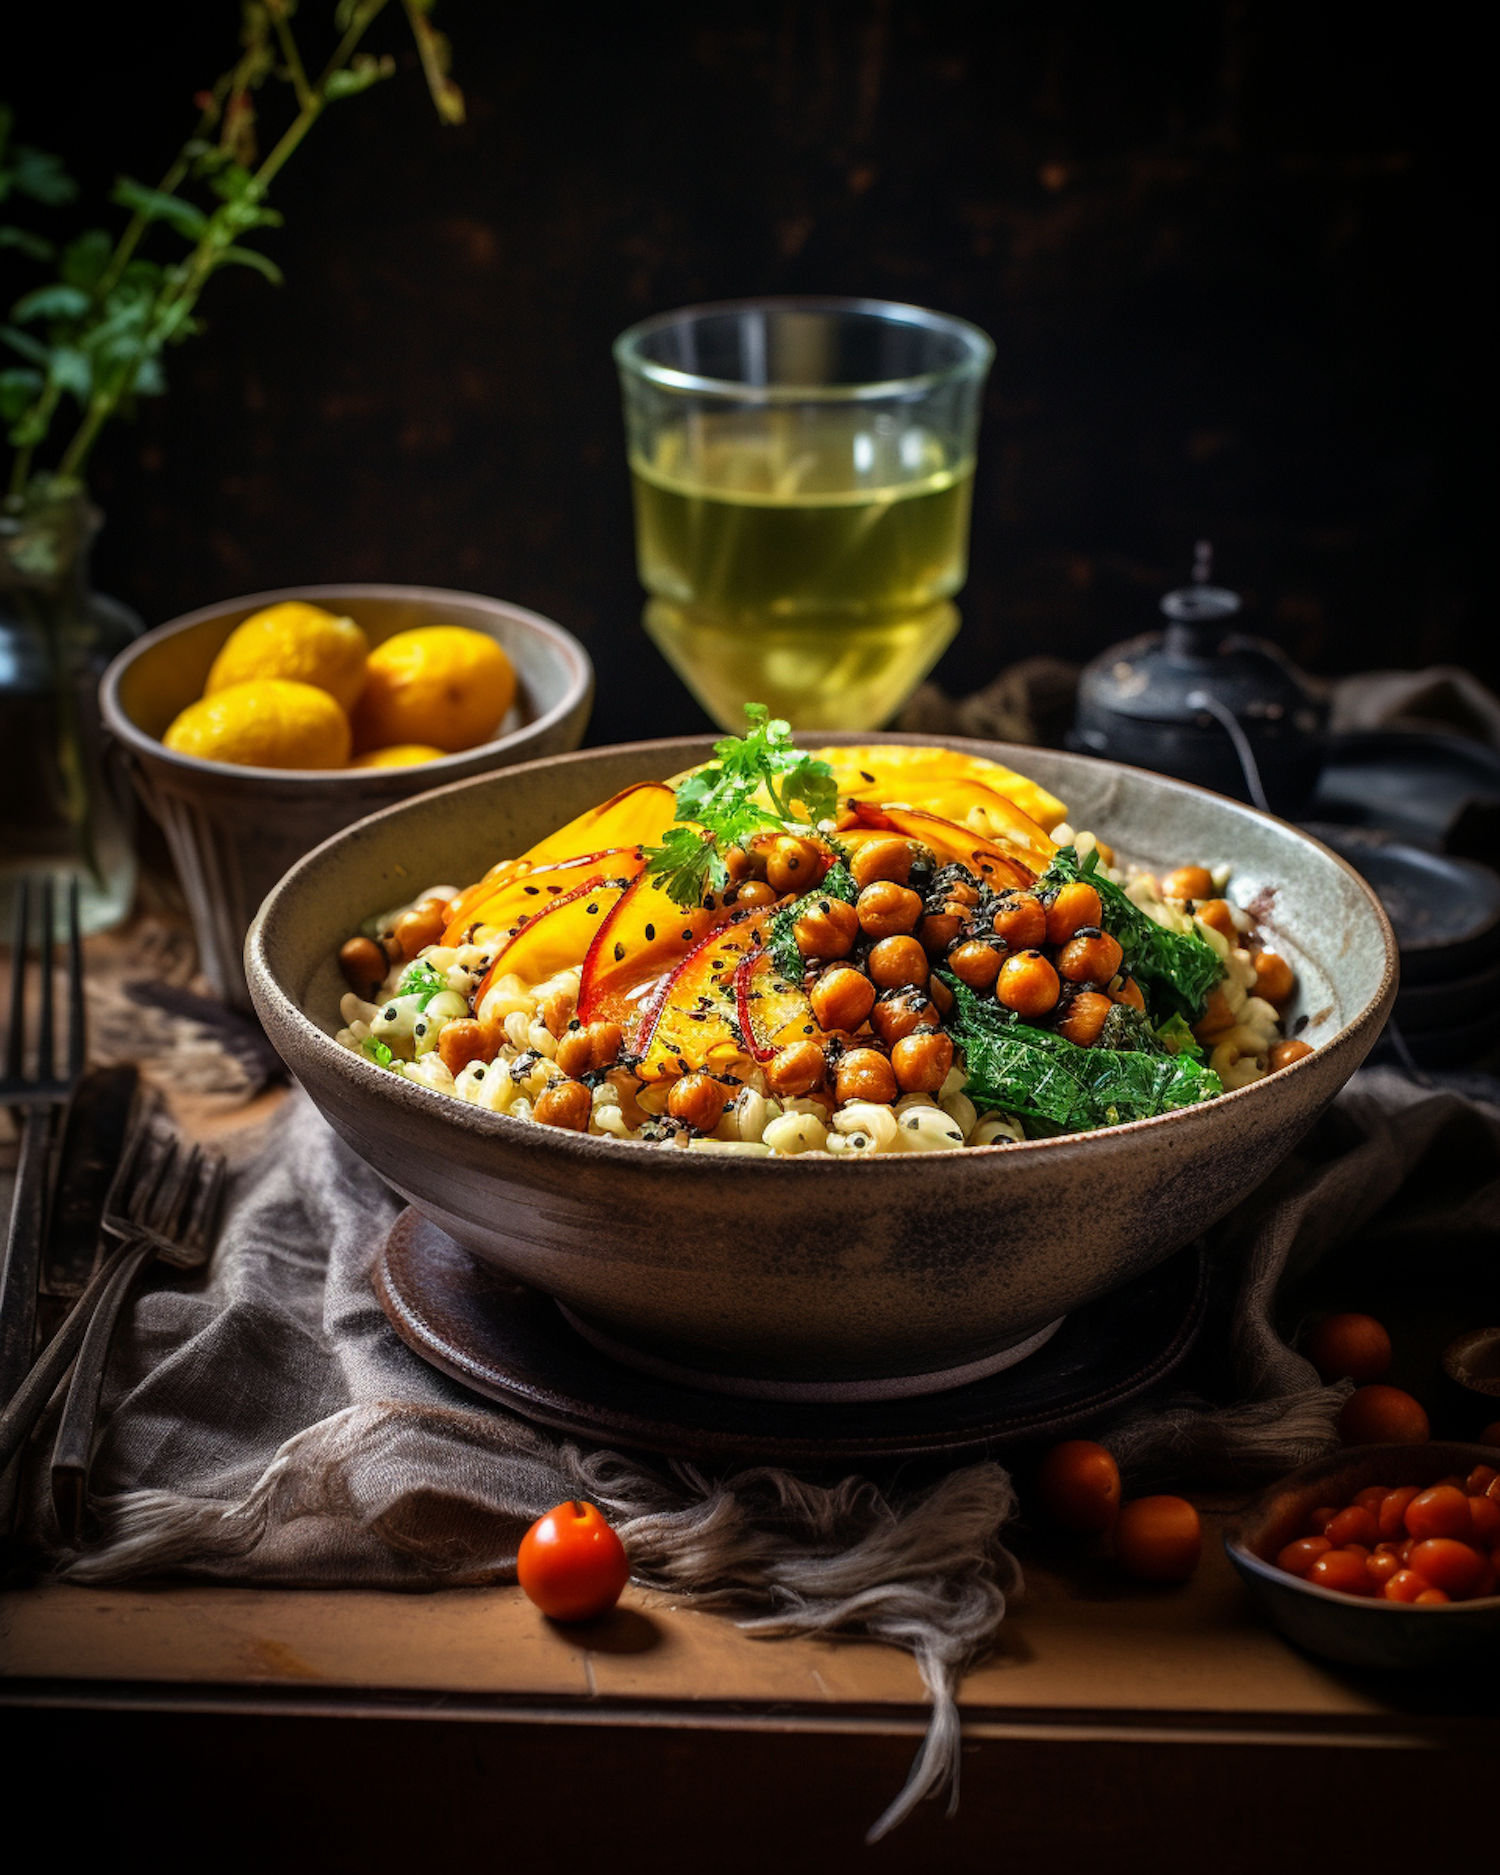 Rustic Chickpea and Pepper Grain Bowl